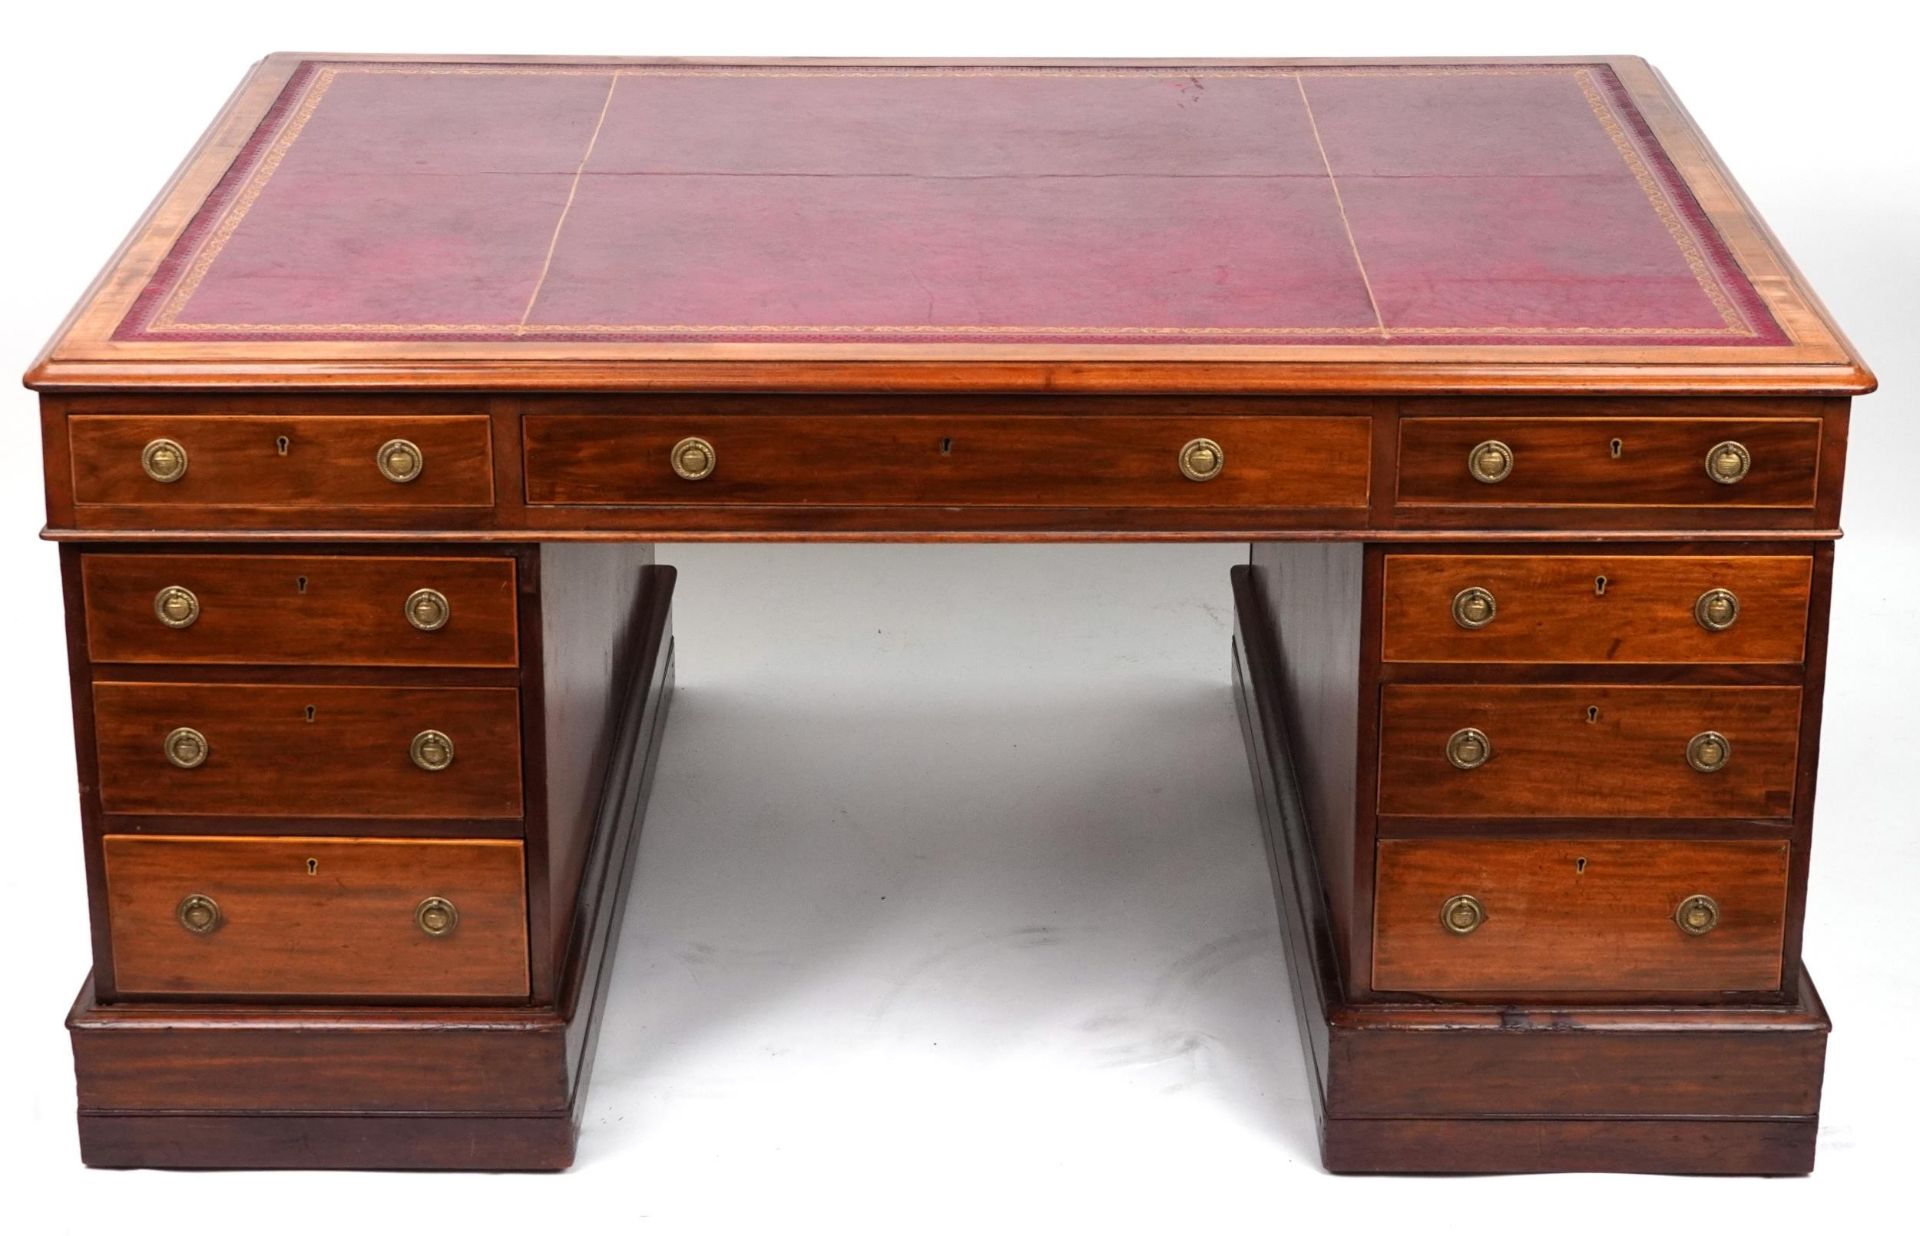 Hobbs & Co of London, Victorian inlaid mahogany partner's desk with tooled leather insert, twelve